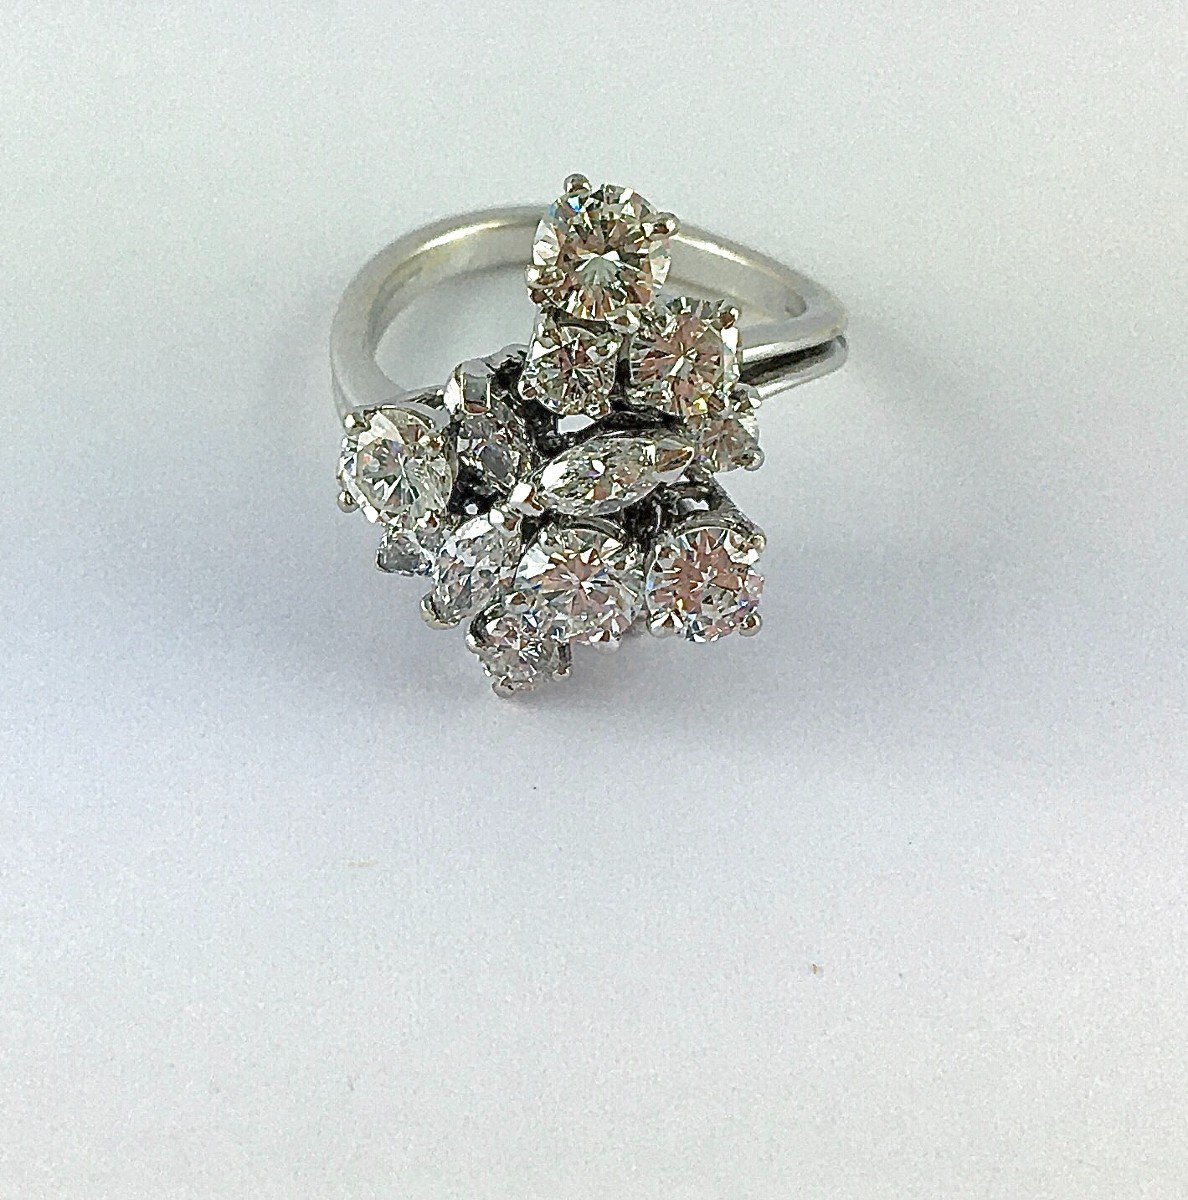 Vintage Asymmetrical Ring With Brilliant Cut Diamonds And Shuttles On White Gold-photo-2